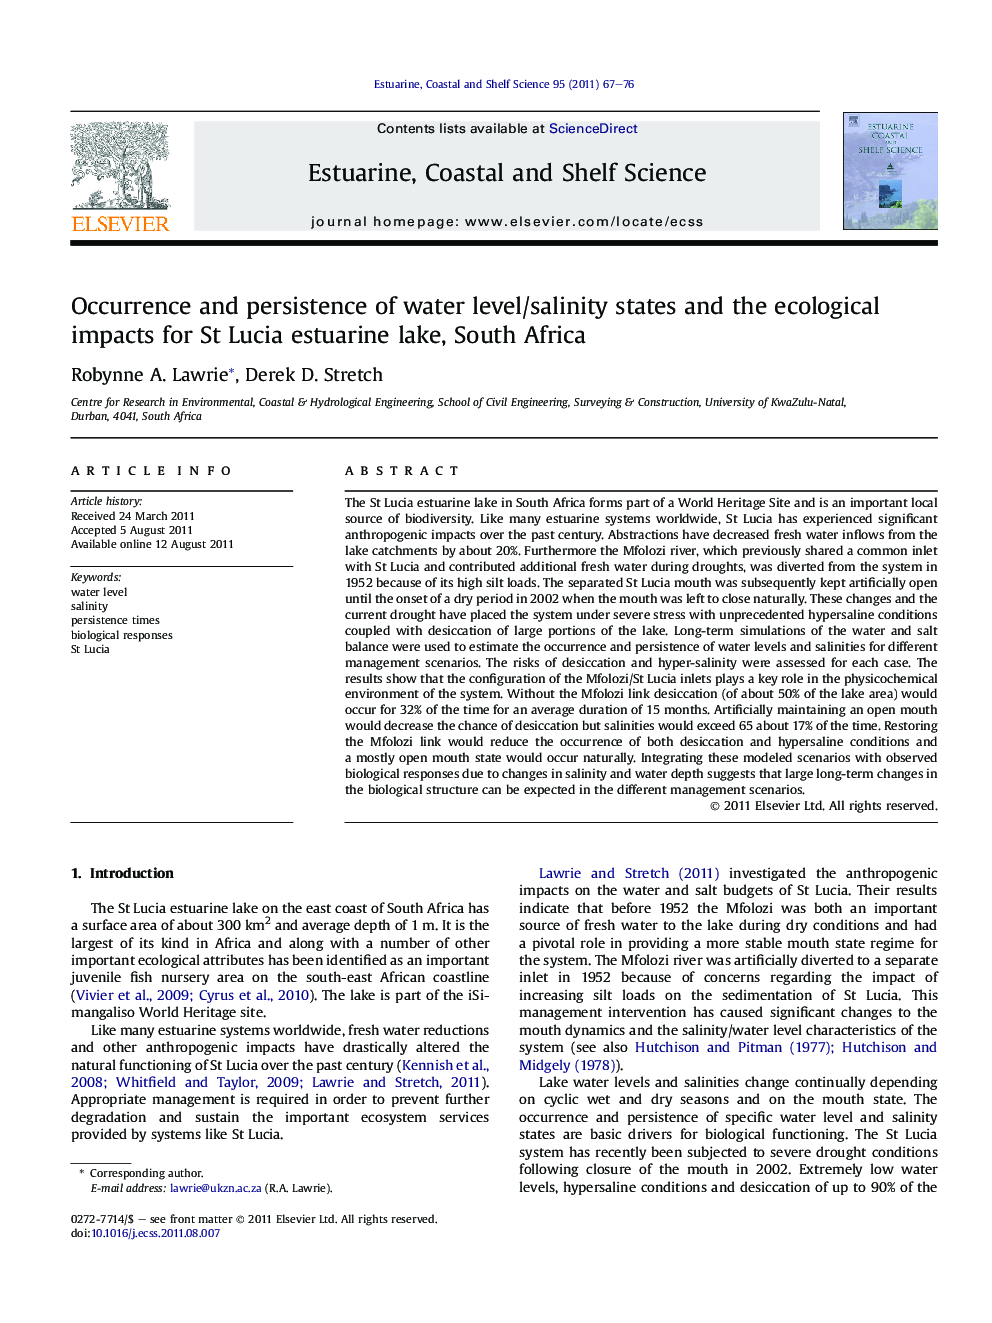 Occurrence and persistence of water level/salinity states and the ecological impacts for St Lucia estuarine lake, South Africa